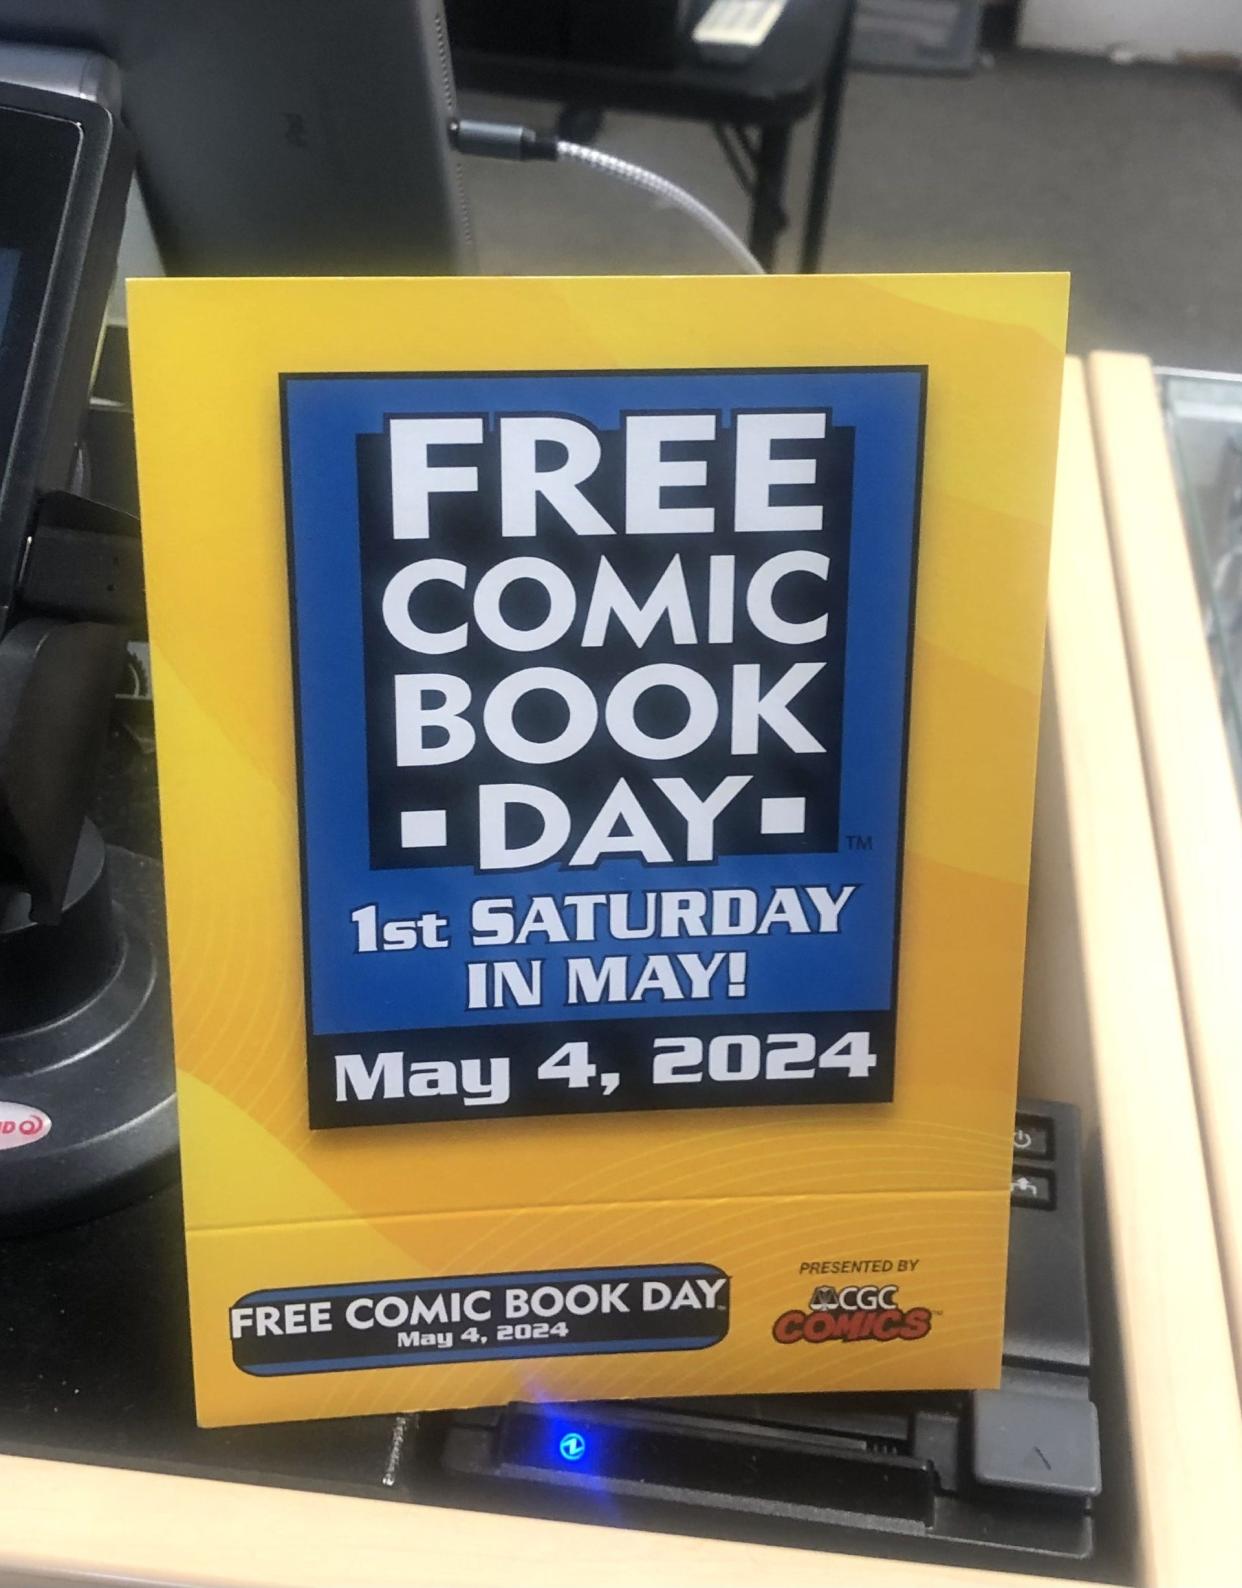 This placard promoting Saturday's observance of "Free Comic Book Day" was present Tuesday at Gatekeeper Hobbies: Cards and Games, 1917 S.W. Gage Blvd.